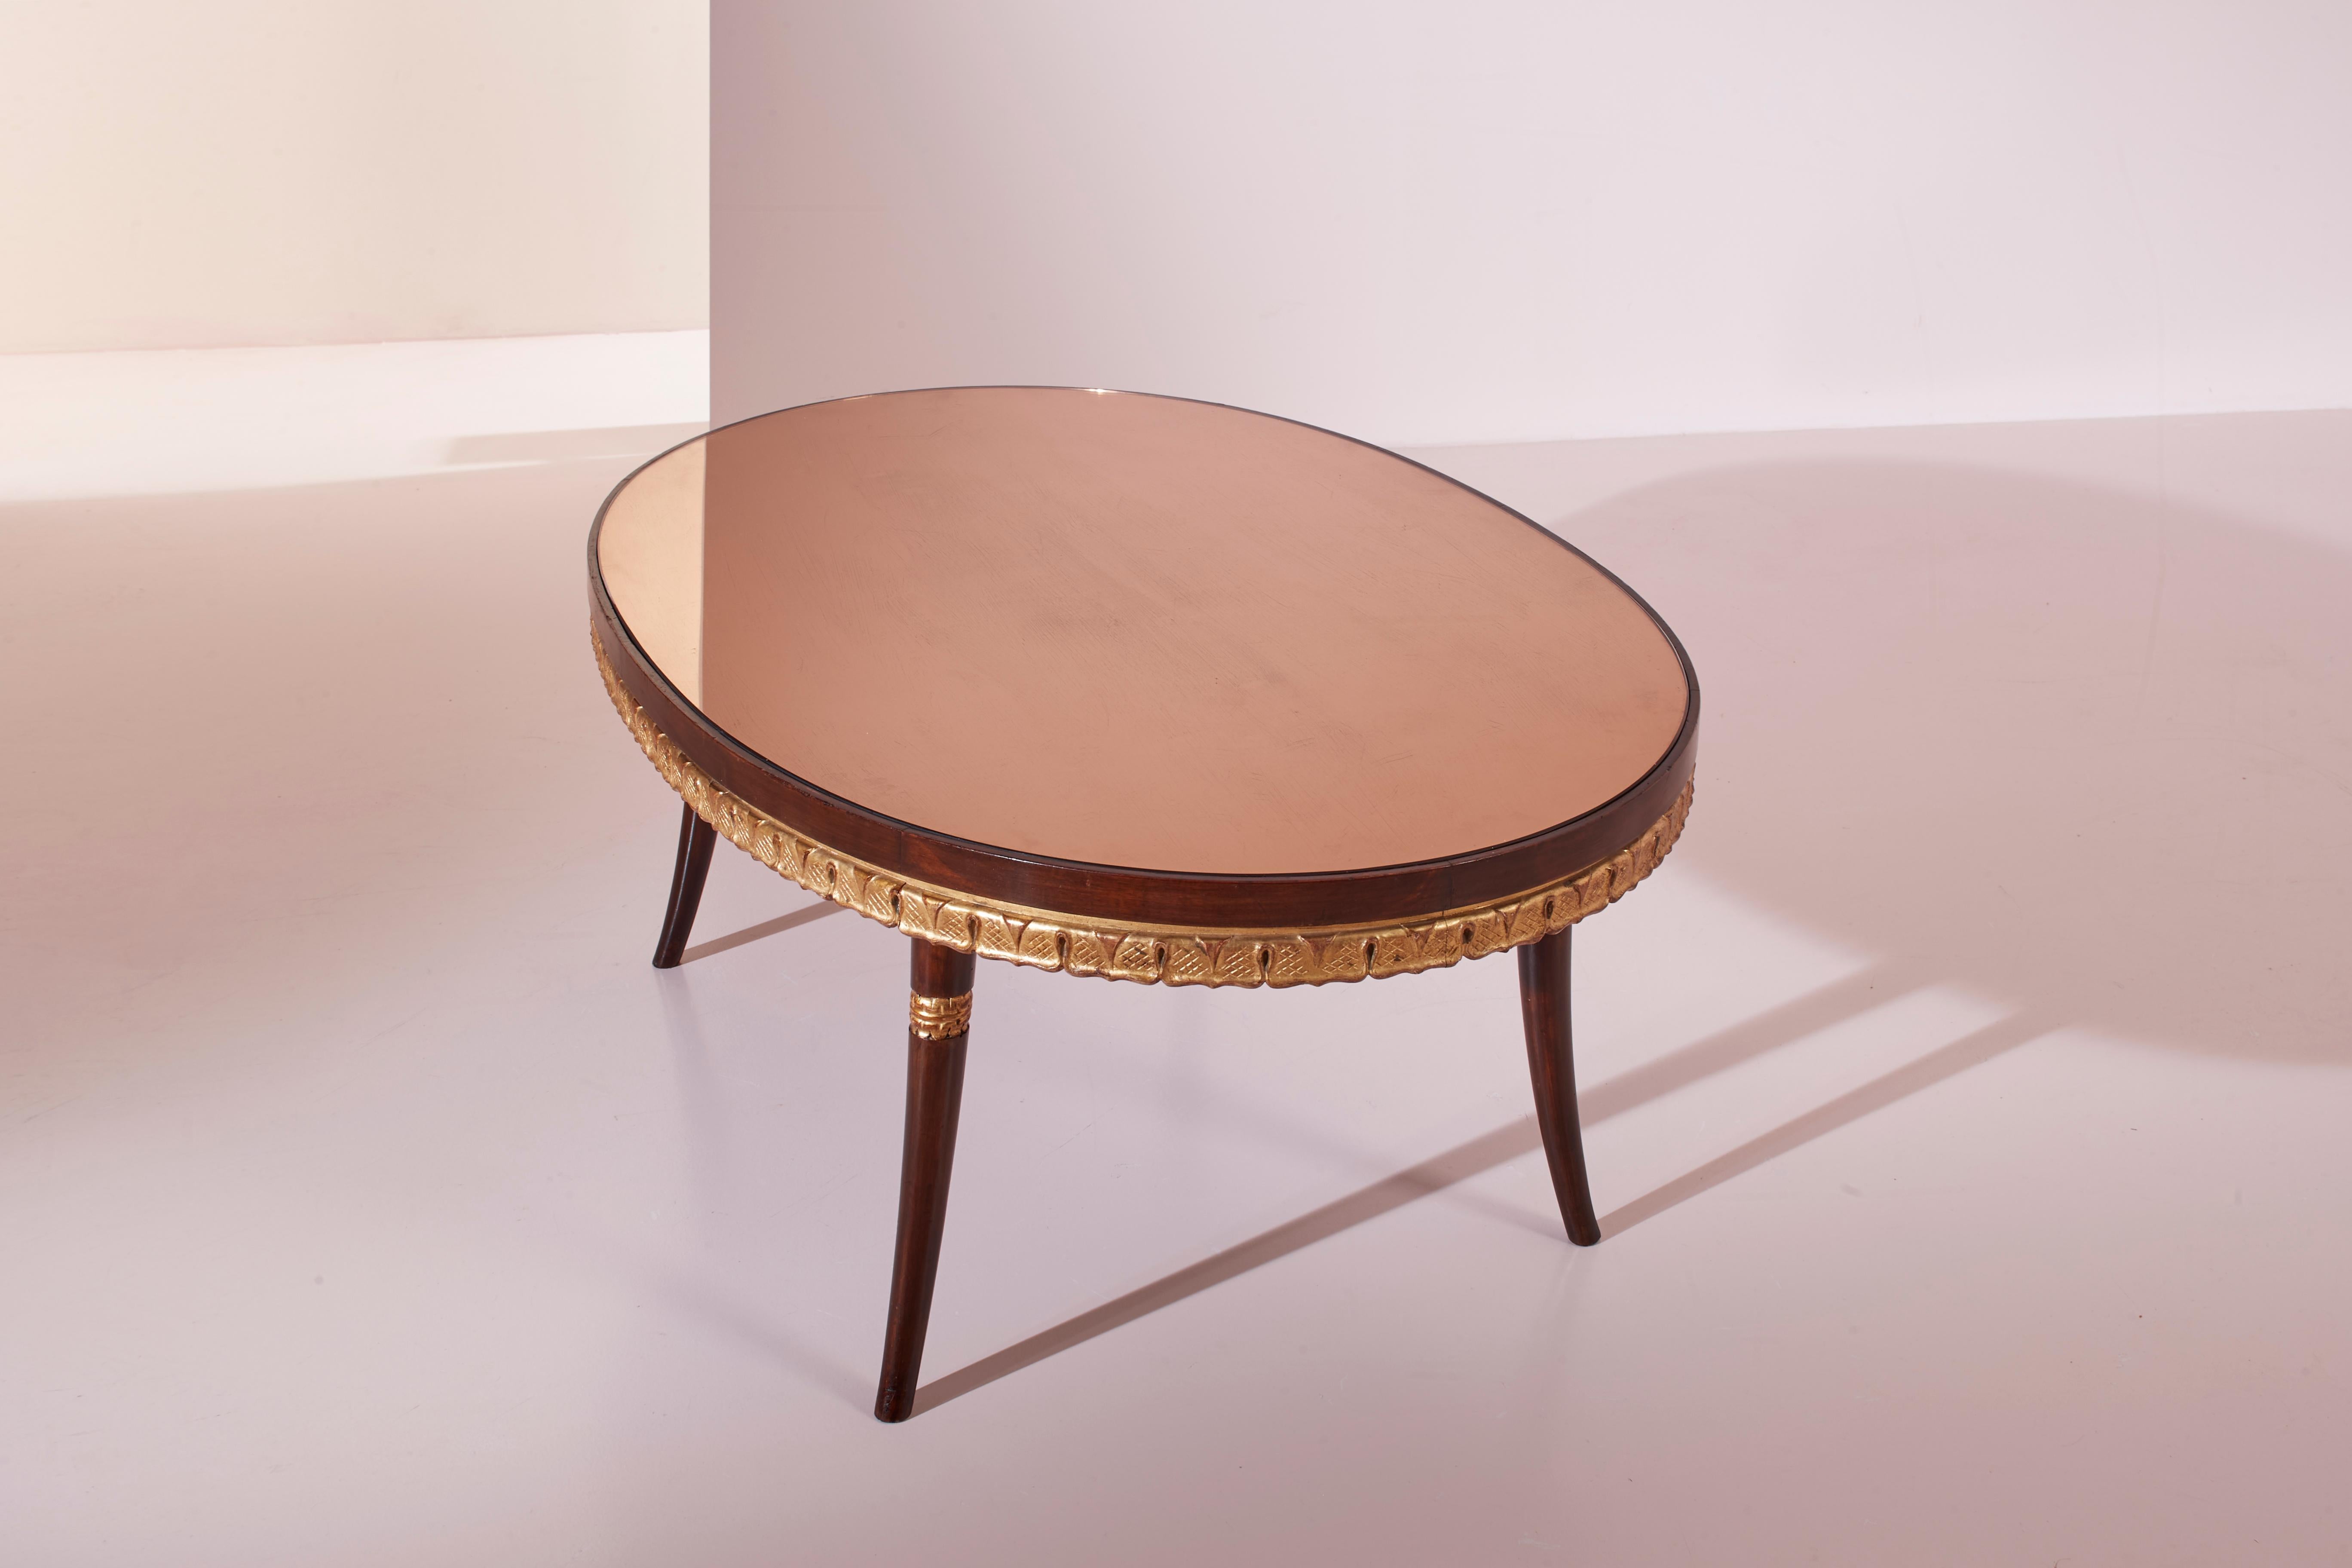 Paolo buffa coffee table with painted and gilded wood and a mirrored glass top For Sale 3